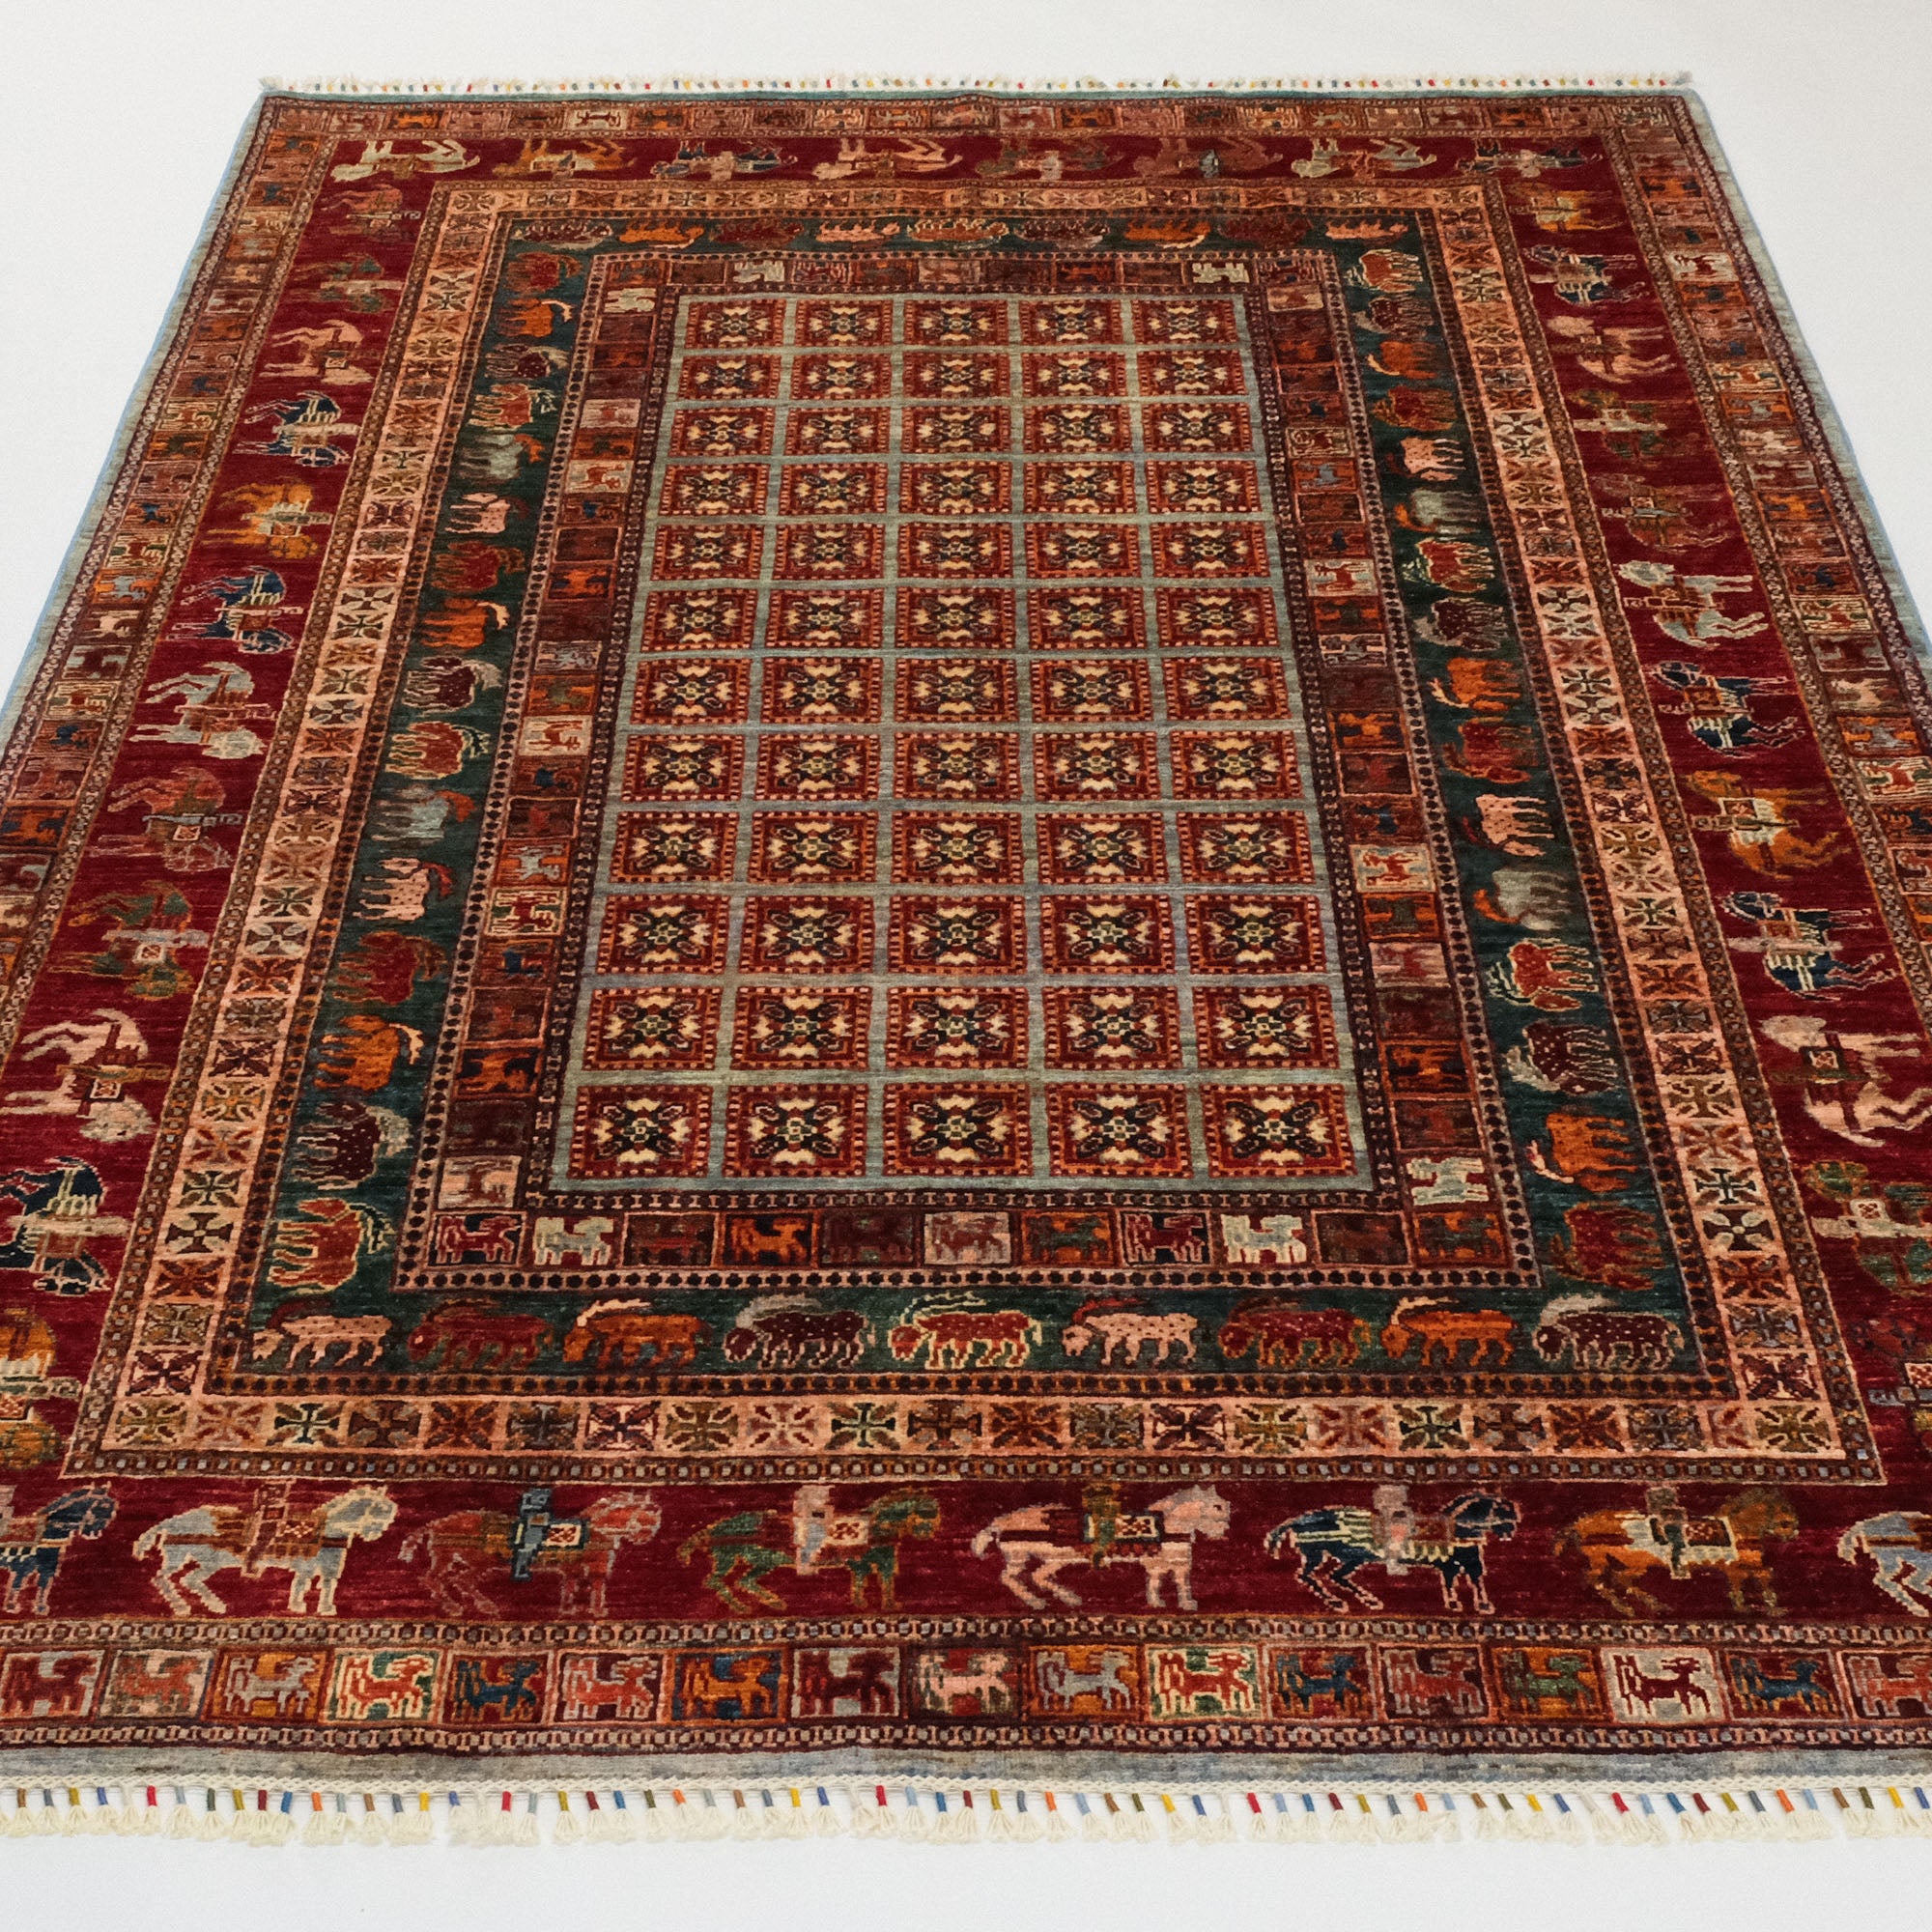 Şahzade Series Hand-Woven Pazyryk Patterned Colorful Wool Carpet